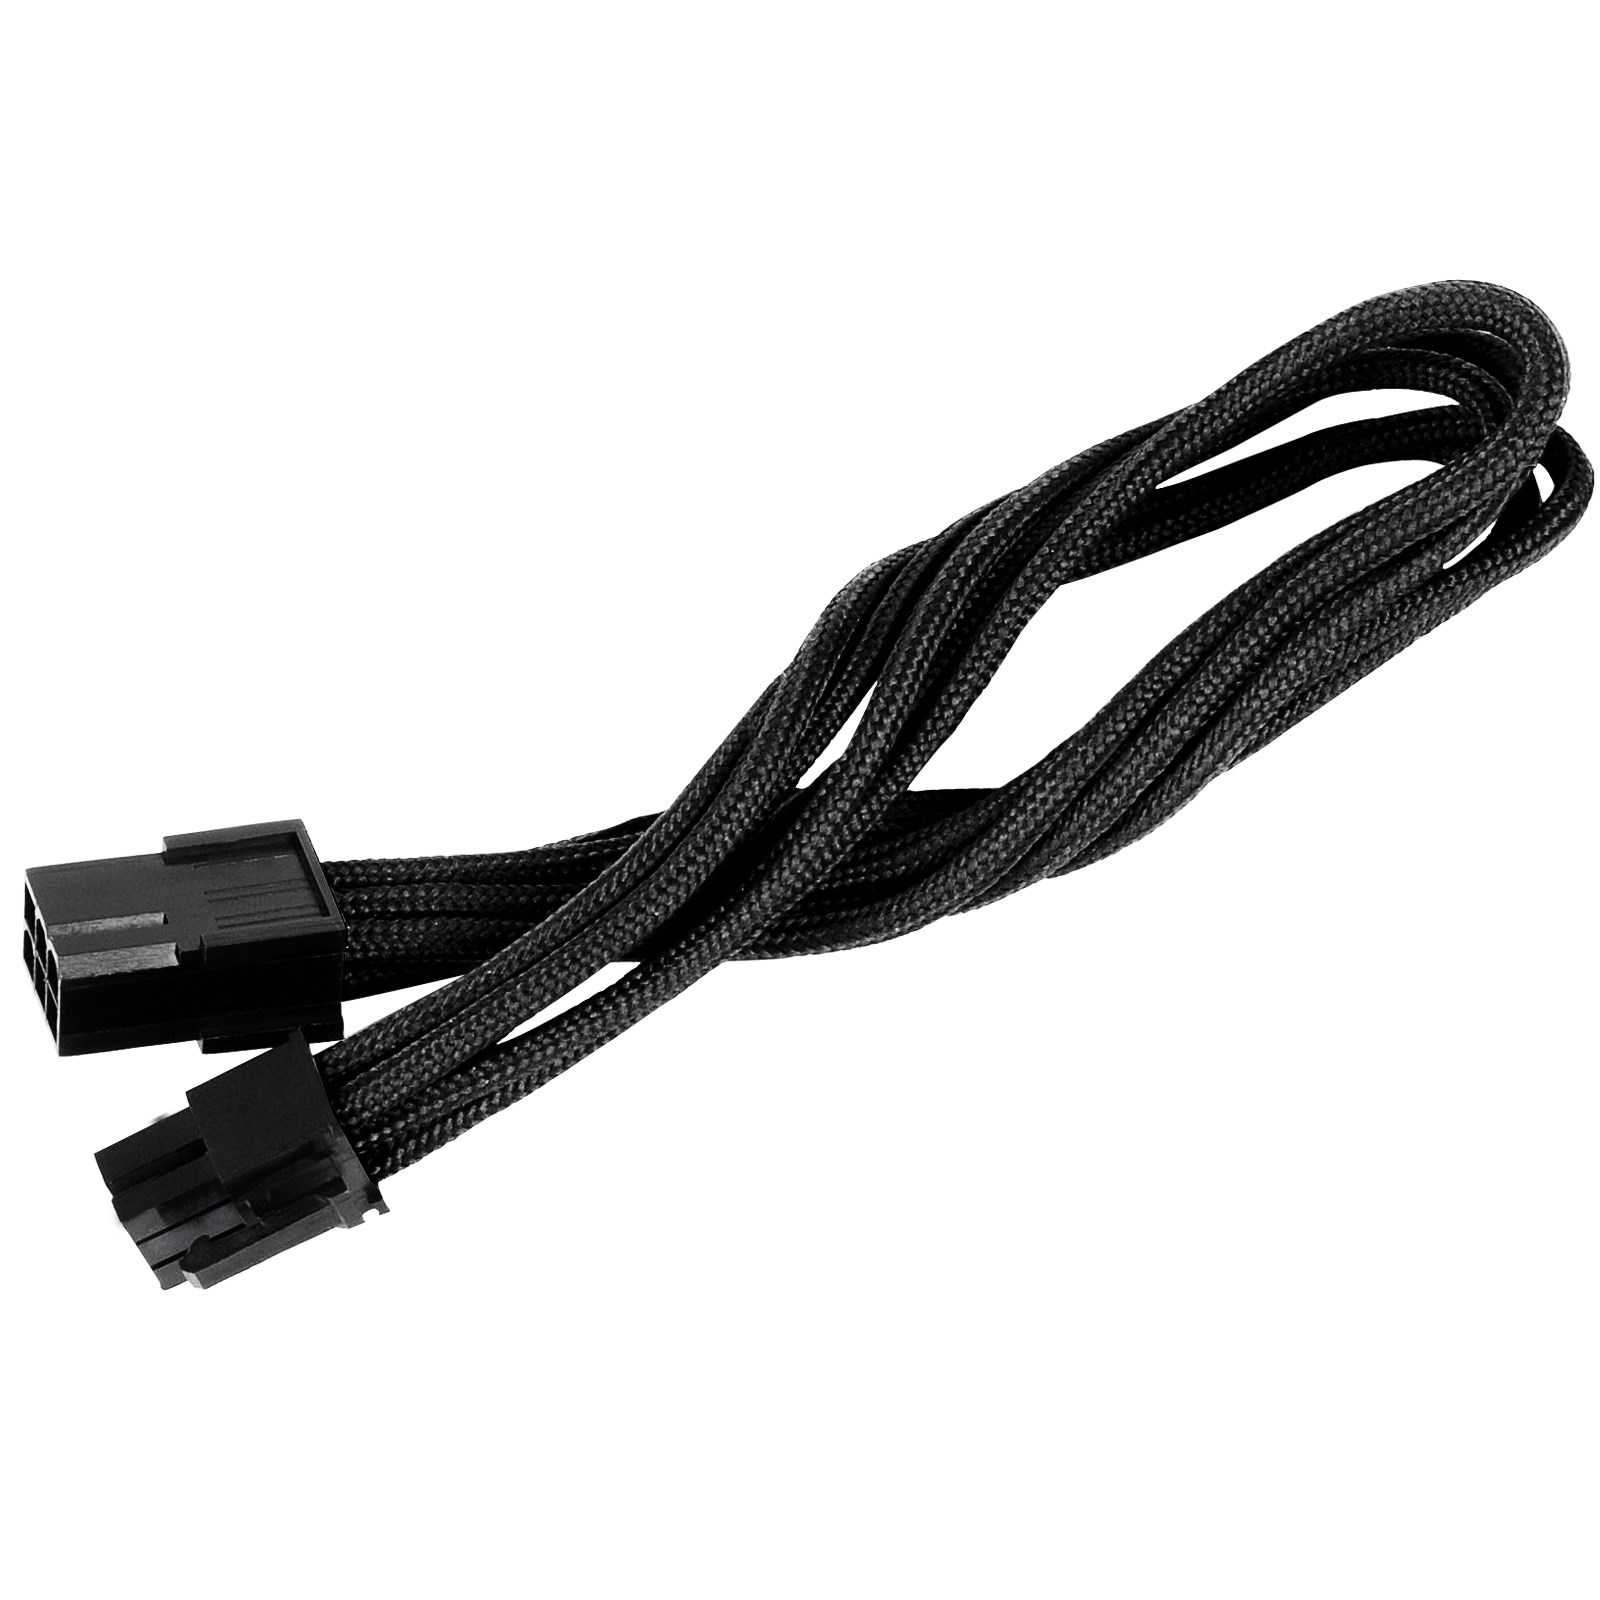 Photos - Cable (video, audio, USB) SilverStone PP07-IDE6B 6-pin PCIe 250mm Extension Cable Sleeved in SST-PP0 